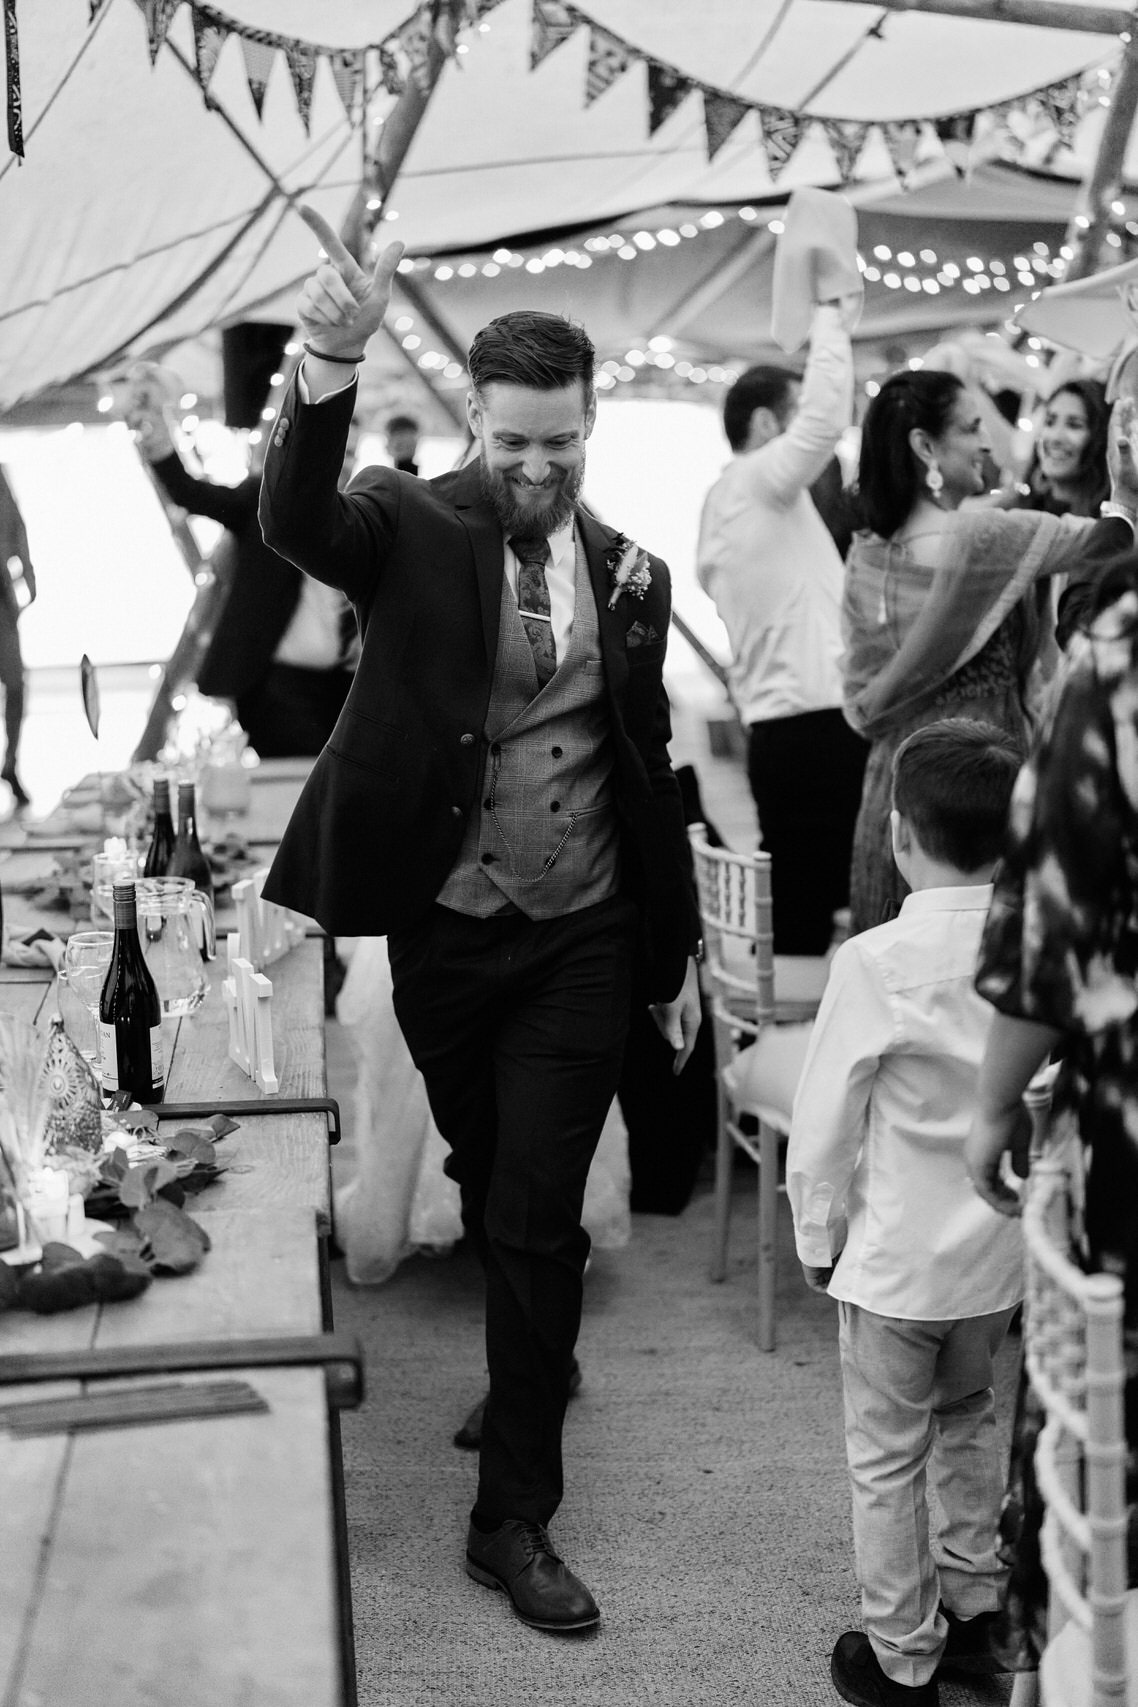 A picture in black and white shows a guy dancing inside a tent.